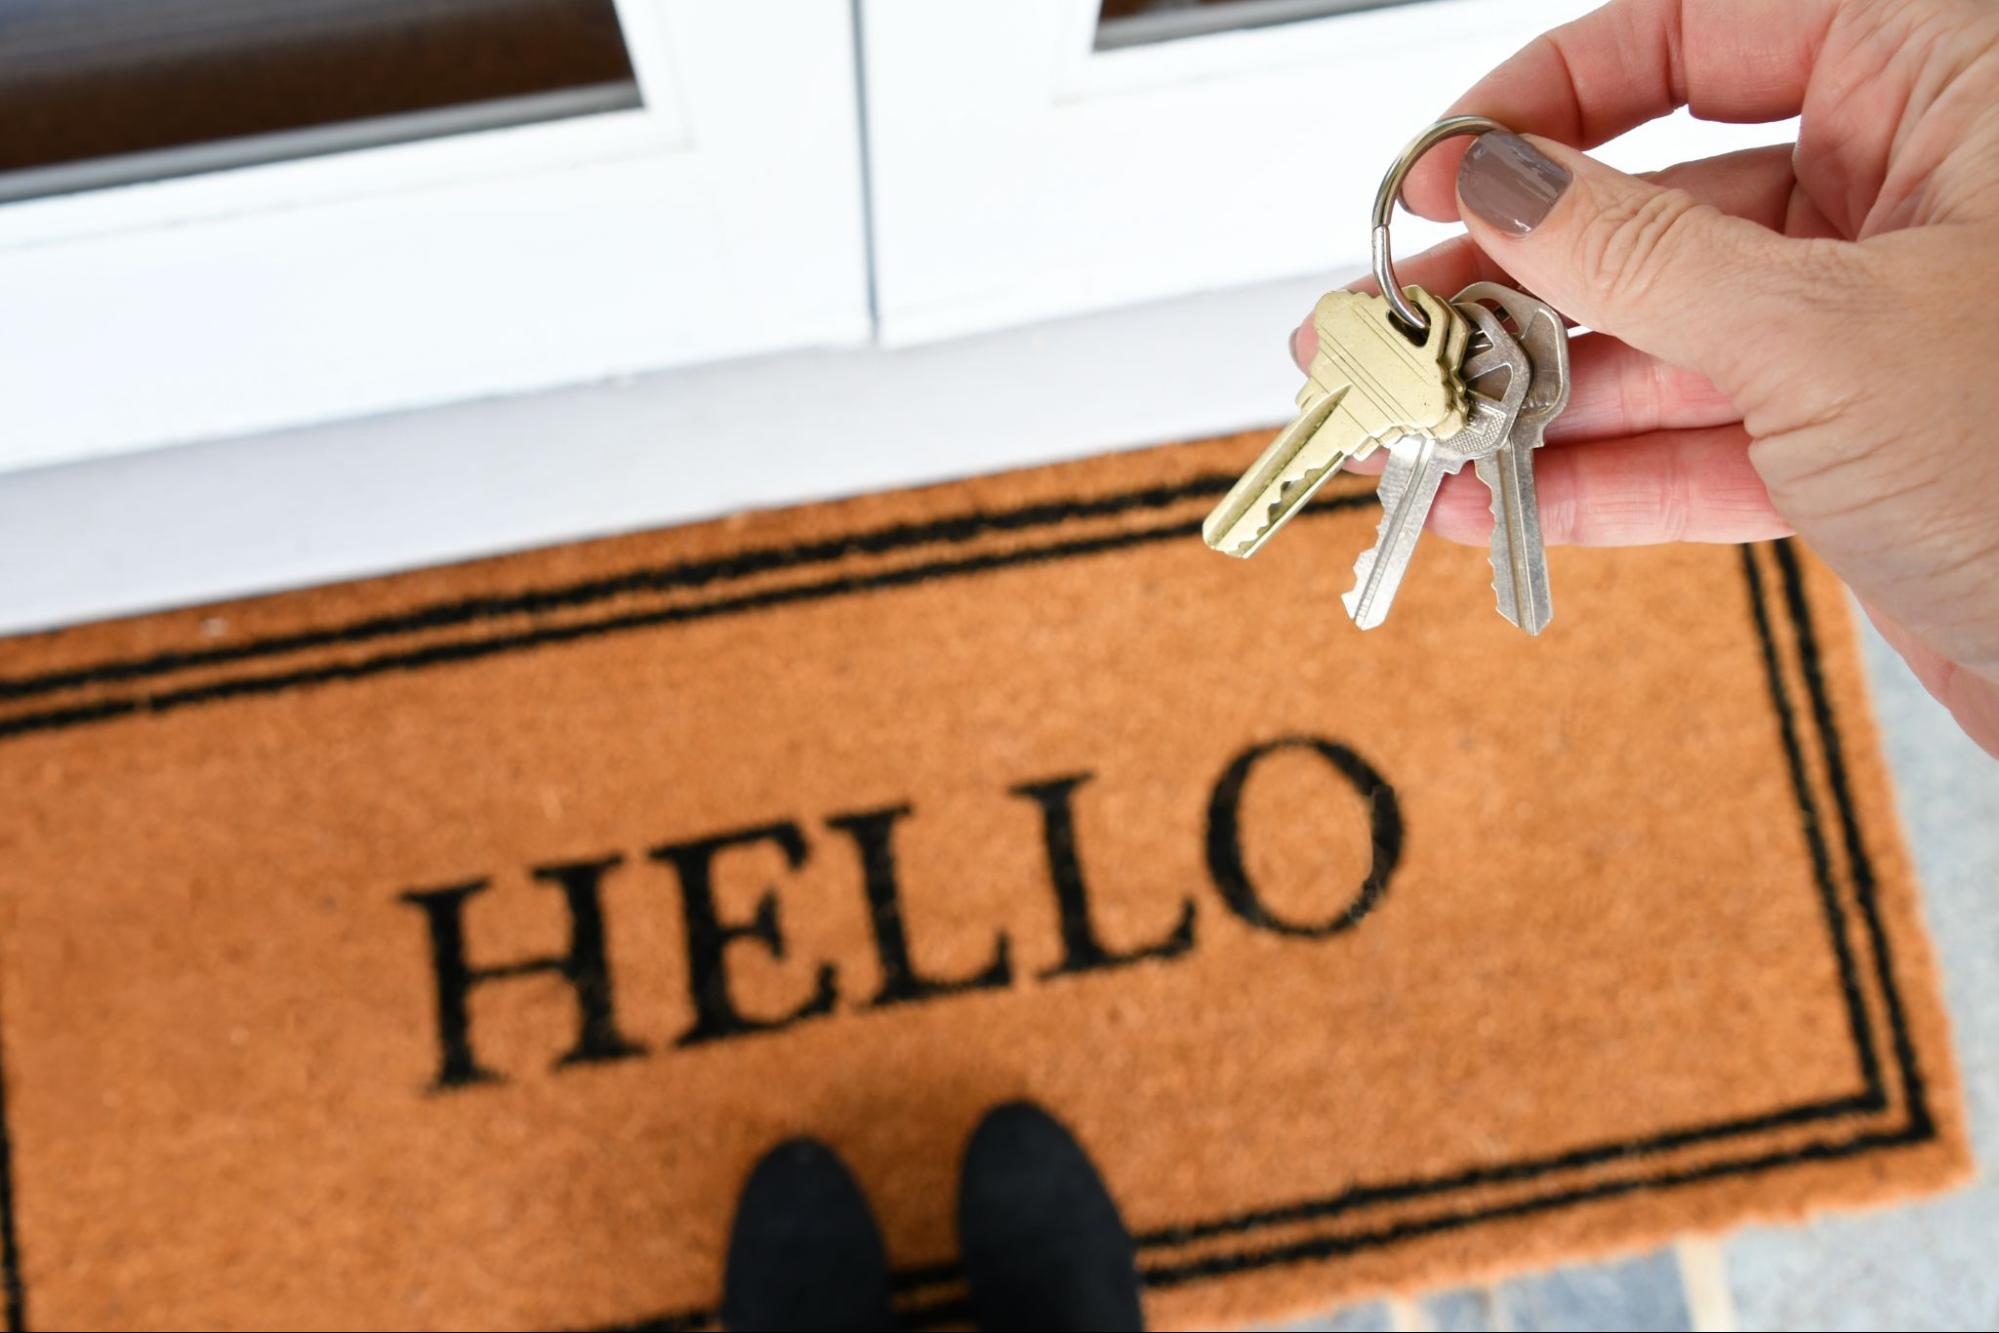 Welcome mat that says "Hello" with apartment key.